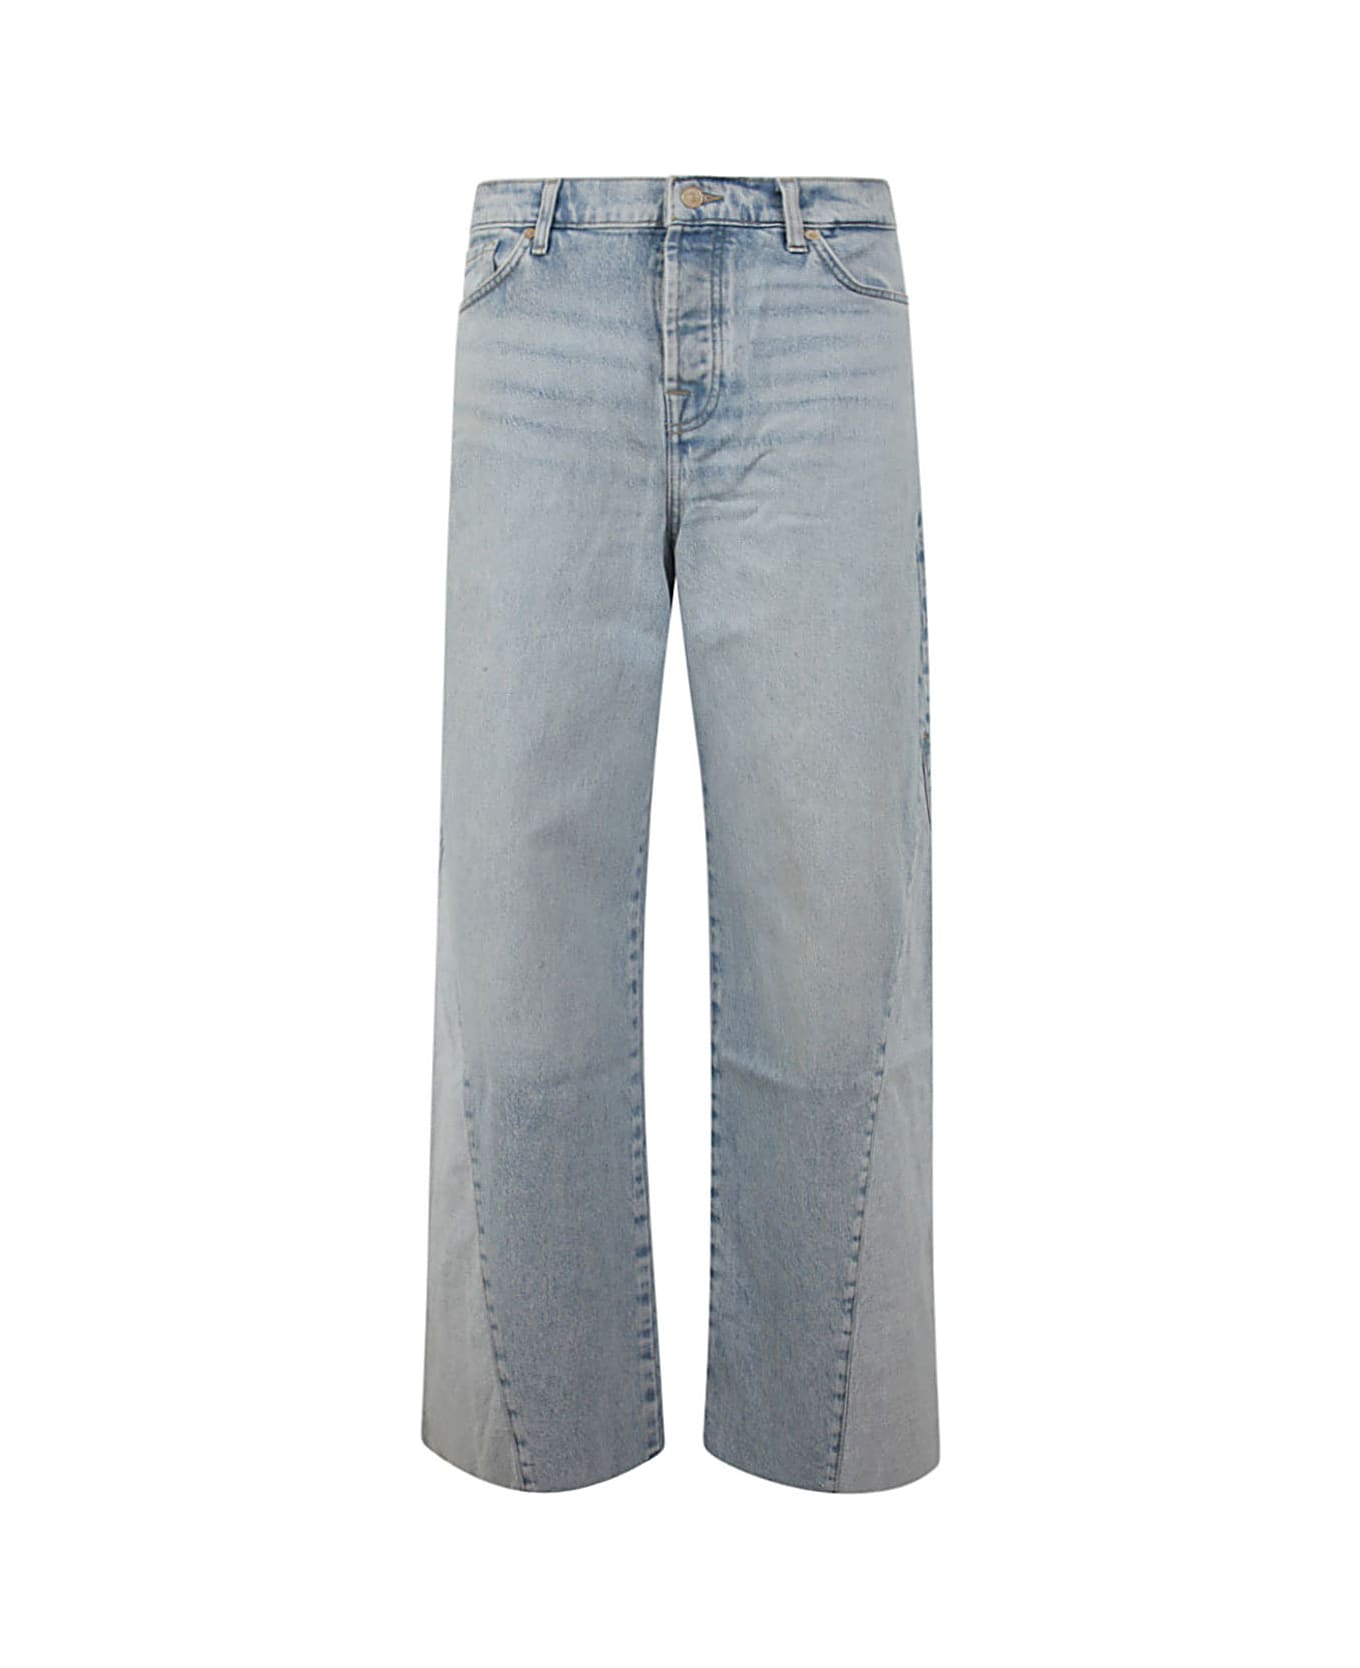 7 For All Mankind Zoey Mid Summer With Panel Jeans - Light Blue デニム